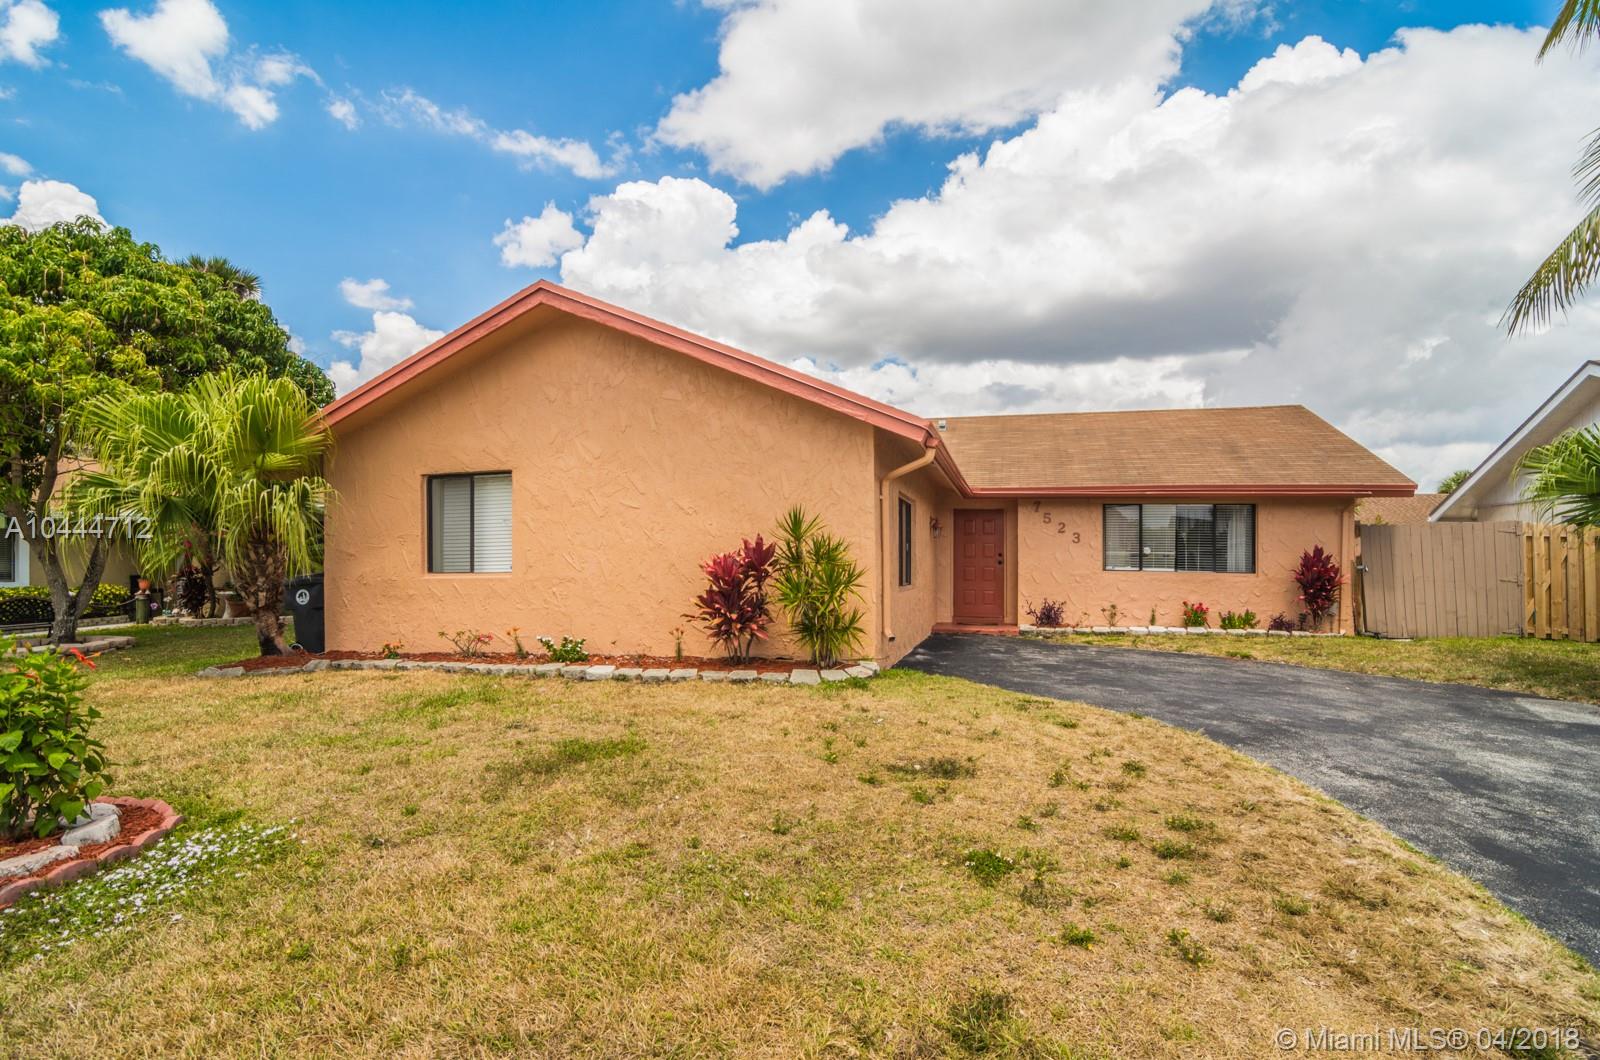 Turn Key. House Is In Immaculate Condition! 4Bedrooms, 3 Bathrooms (2 Master Suites). Nice, Fenced Backyard And Screened Patio. Not A Foreclosure Or Short Sale.